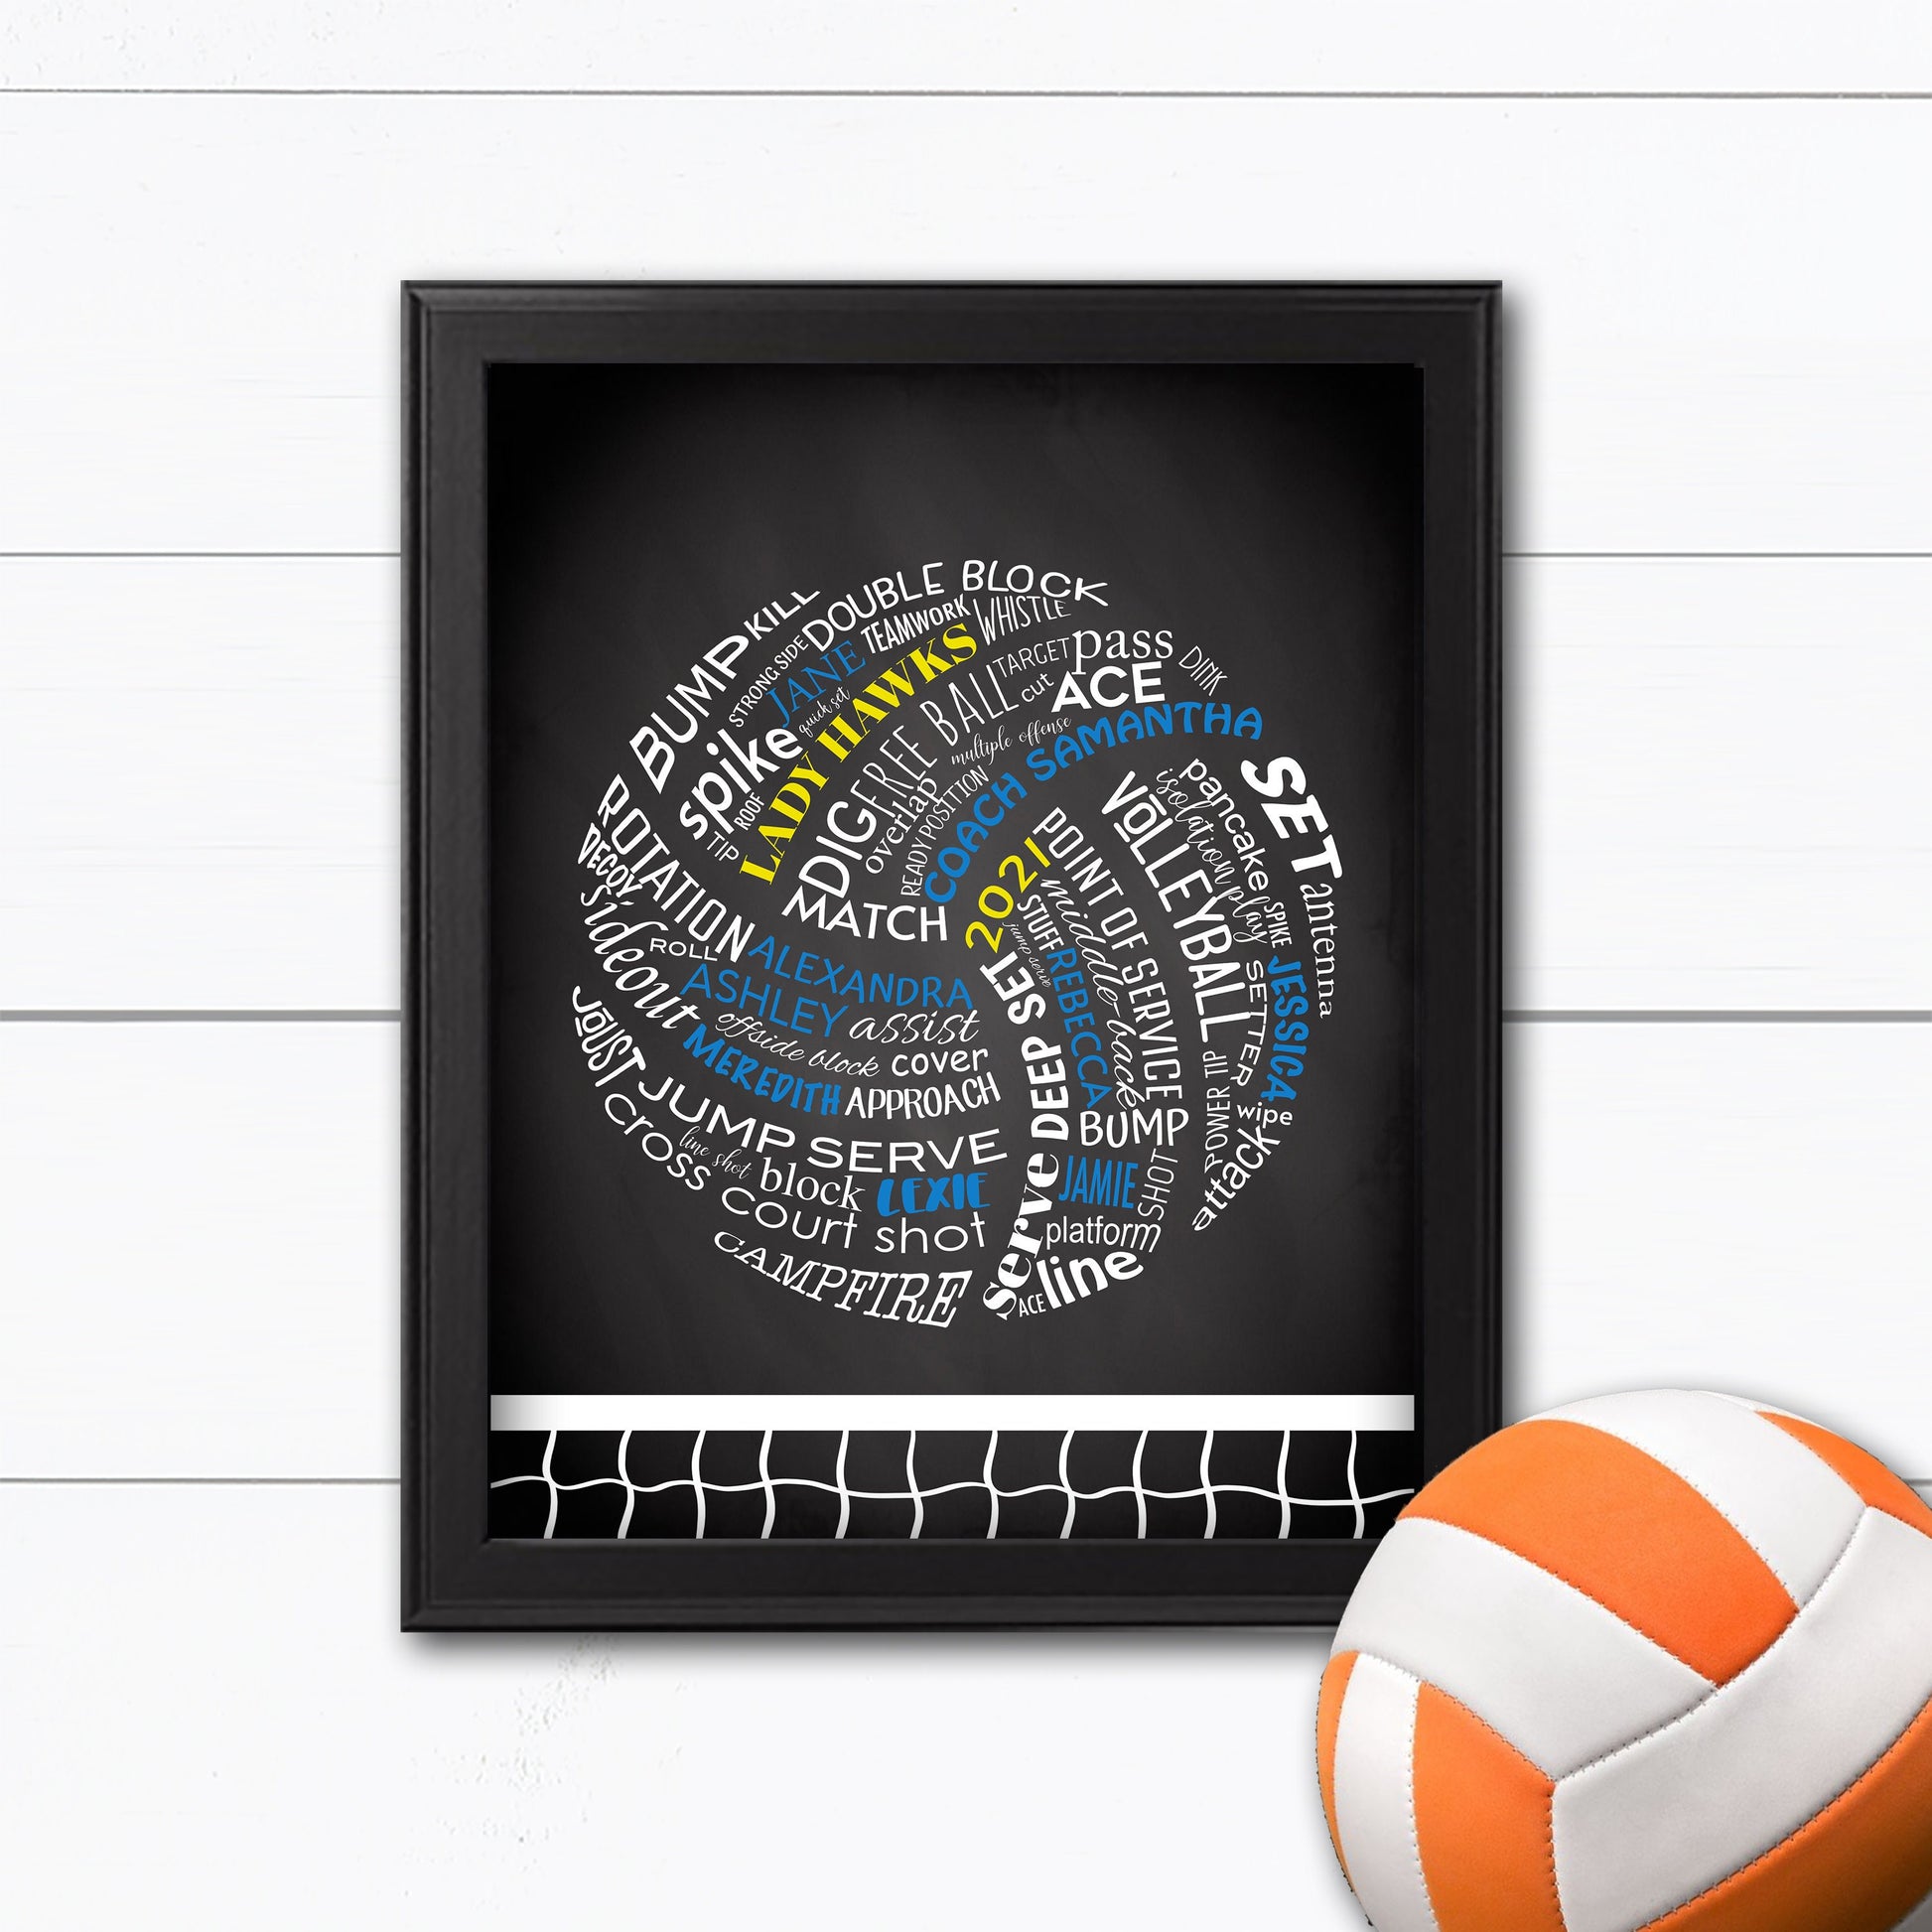 Personalized Volleyball Gifts, Volleyball Coach Gifts, Volleyball Gifts, Typography, Personalized Team, End of Season, Players Names, Sports